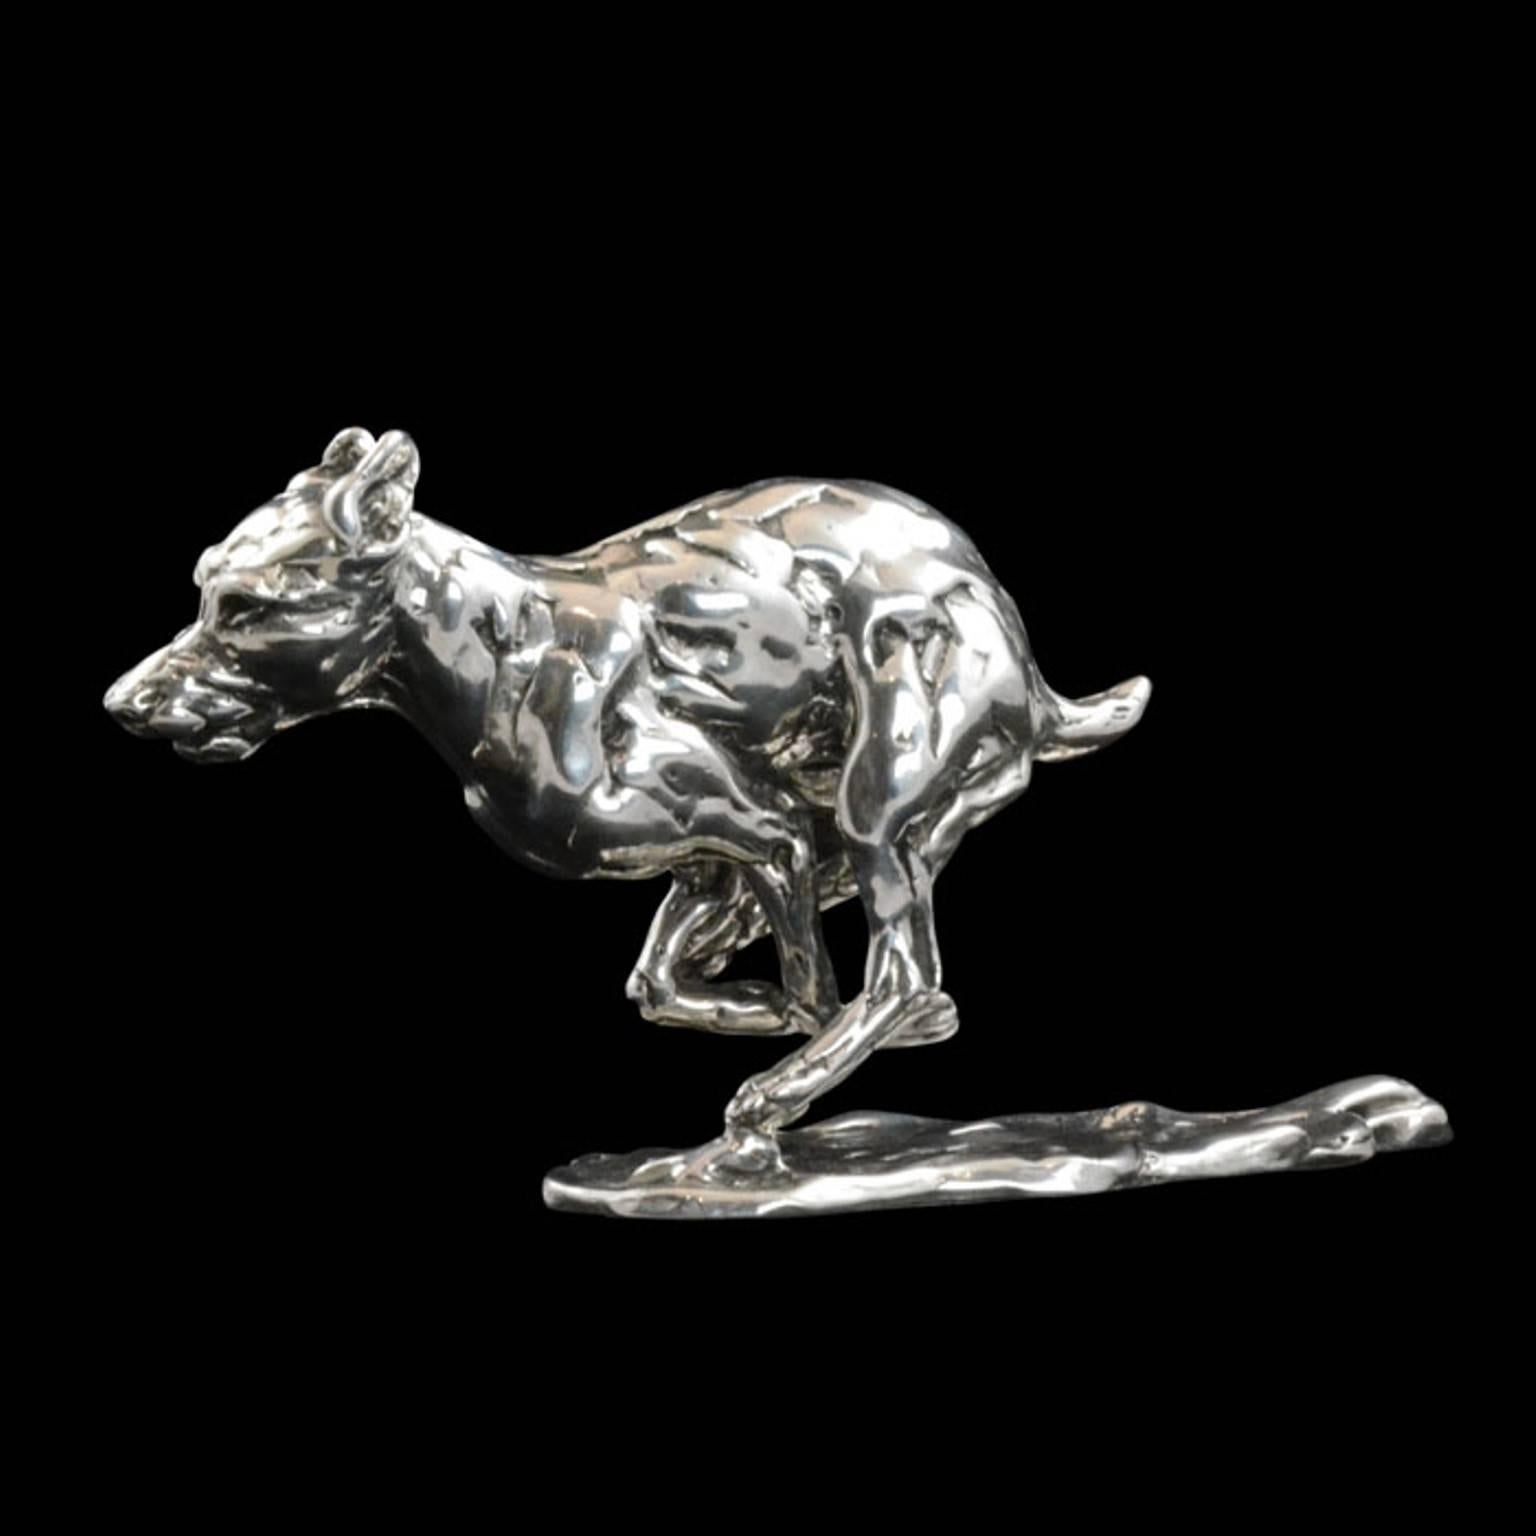  Lucy Kinsella 'Bunched Terrier'  Sterling Silver Scculpture 2